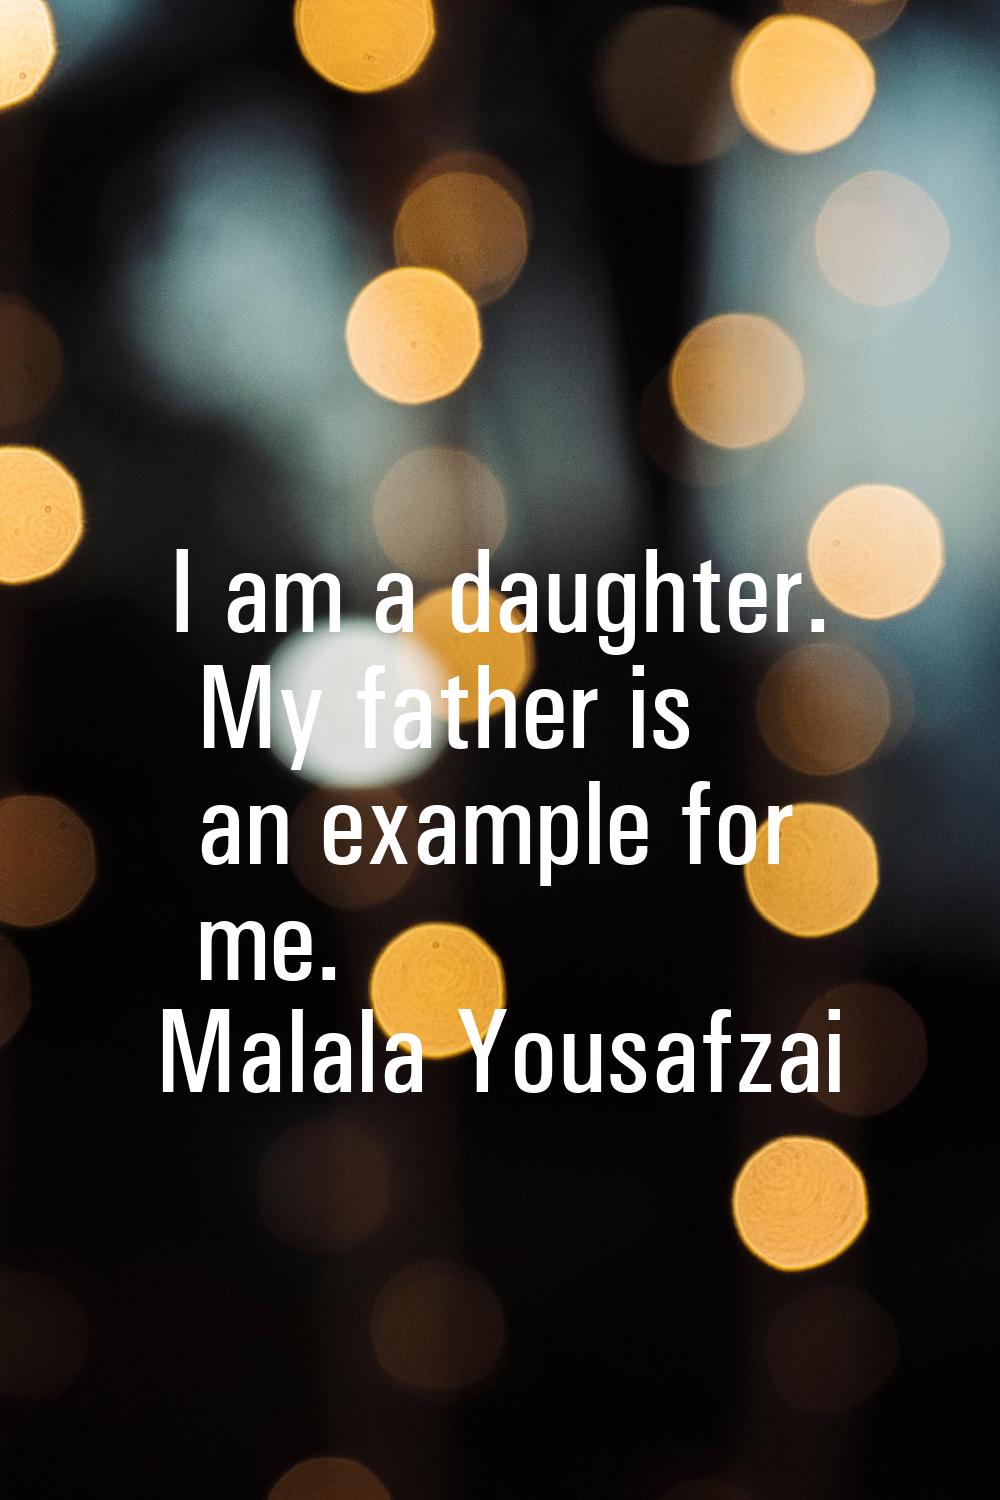 I am a daughter. My father is an example for me.